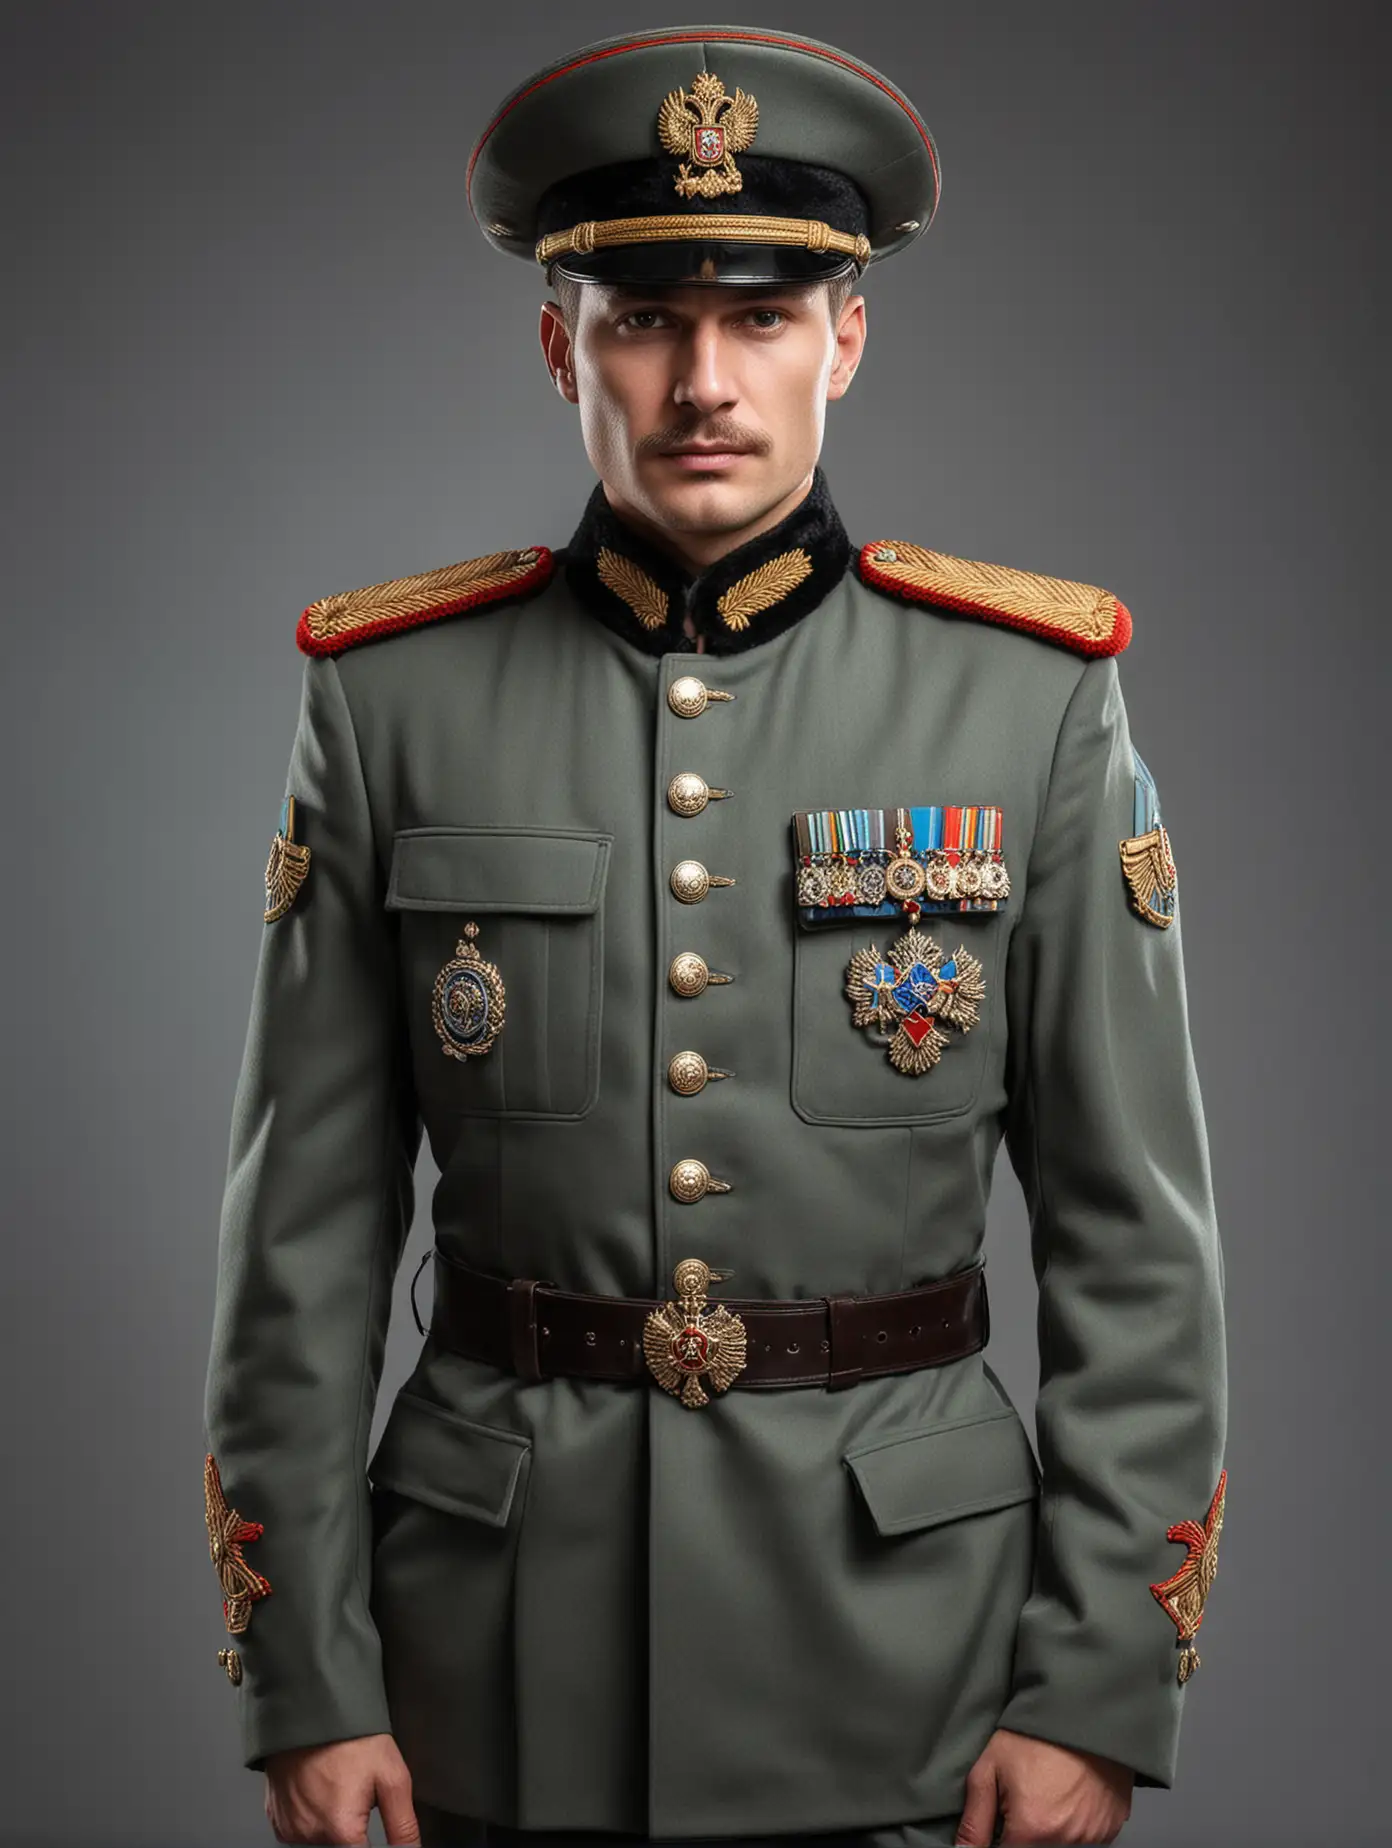 Detailed-Russian-Officer-Poses-in-Full-Uniform